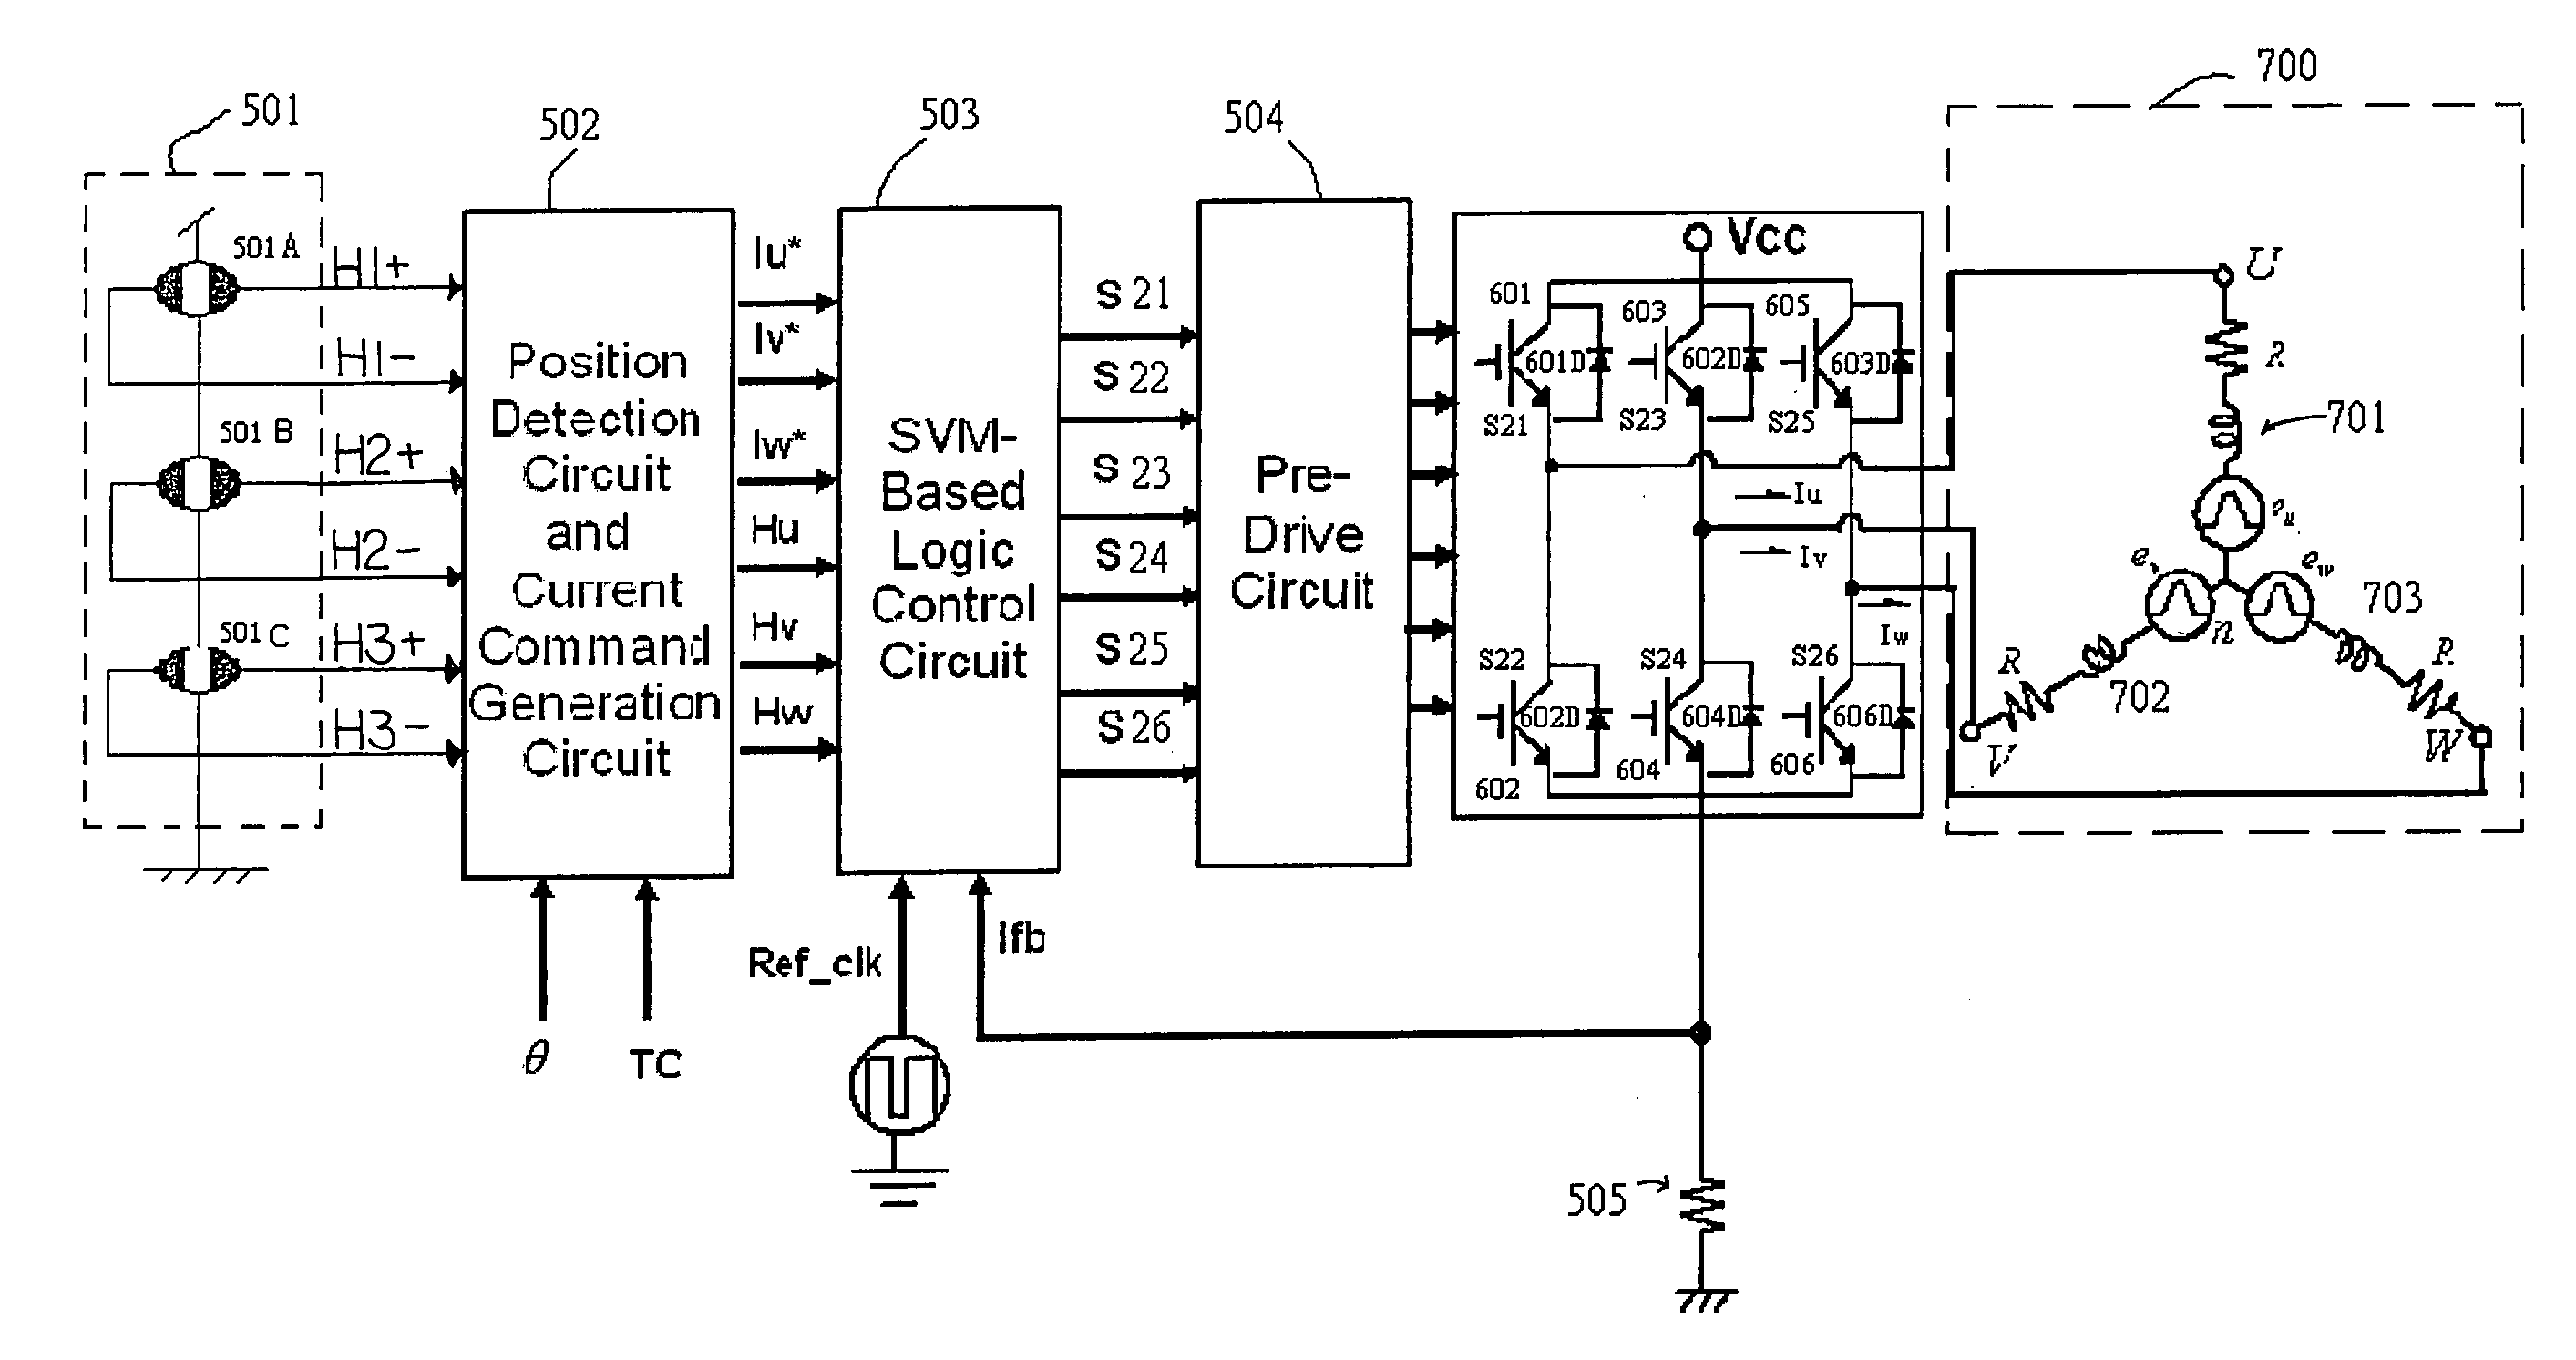 Space vector-based current controlled PWM inverter for motor drives